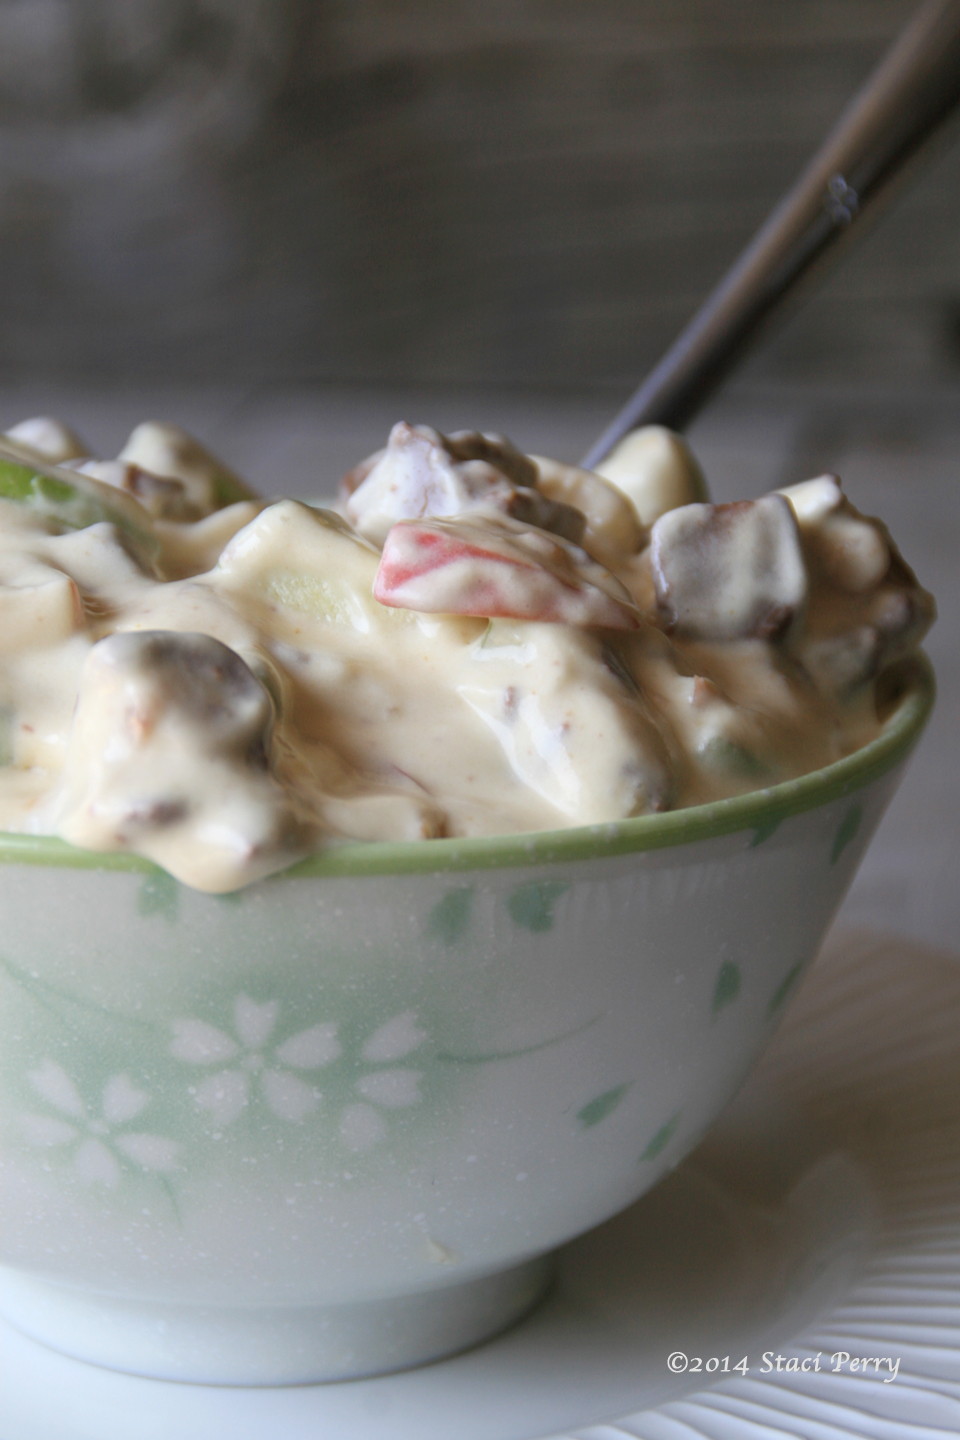 Snickerss candy bar apple salad